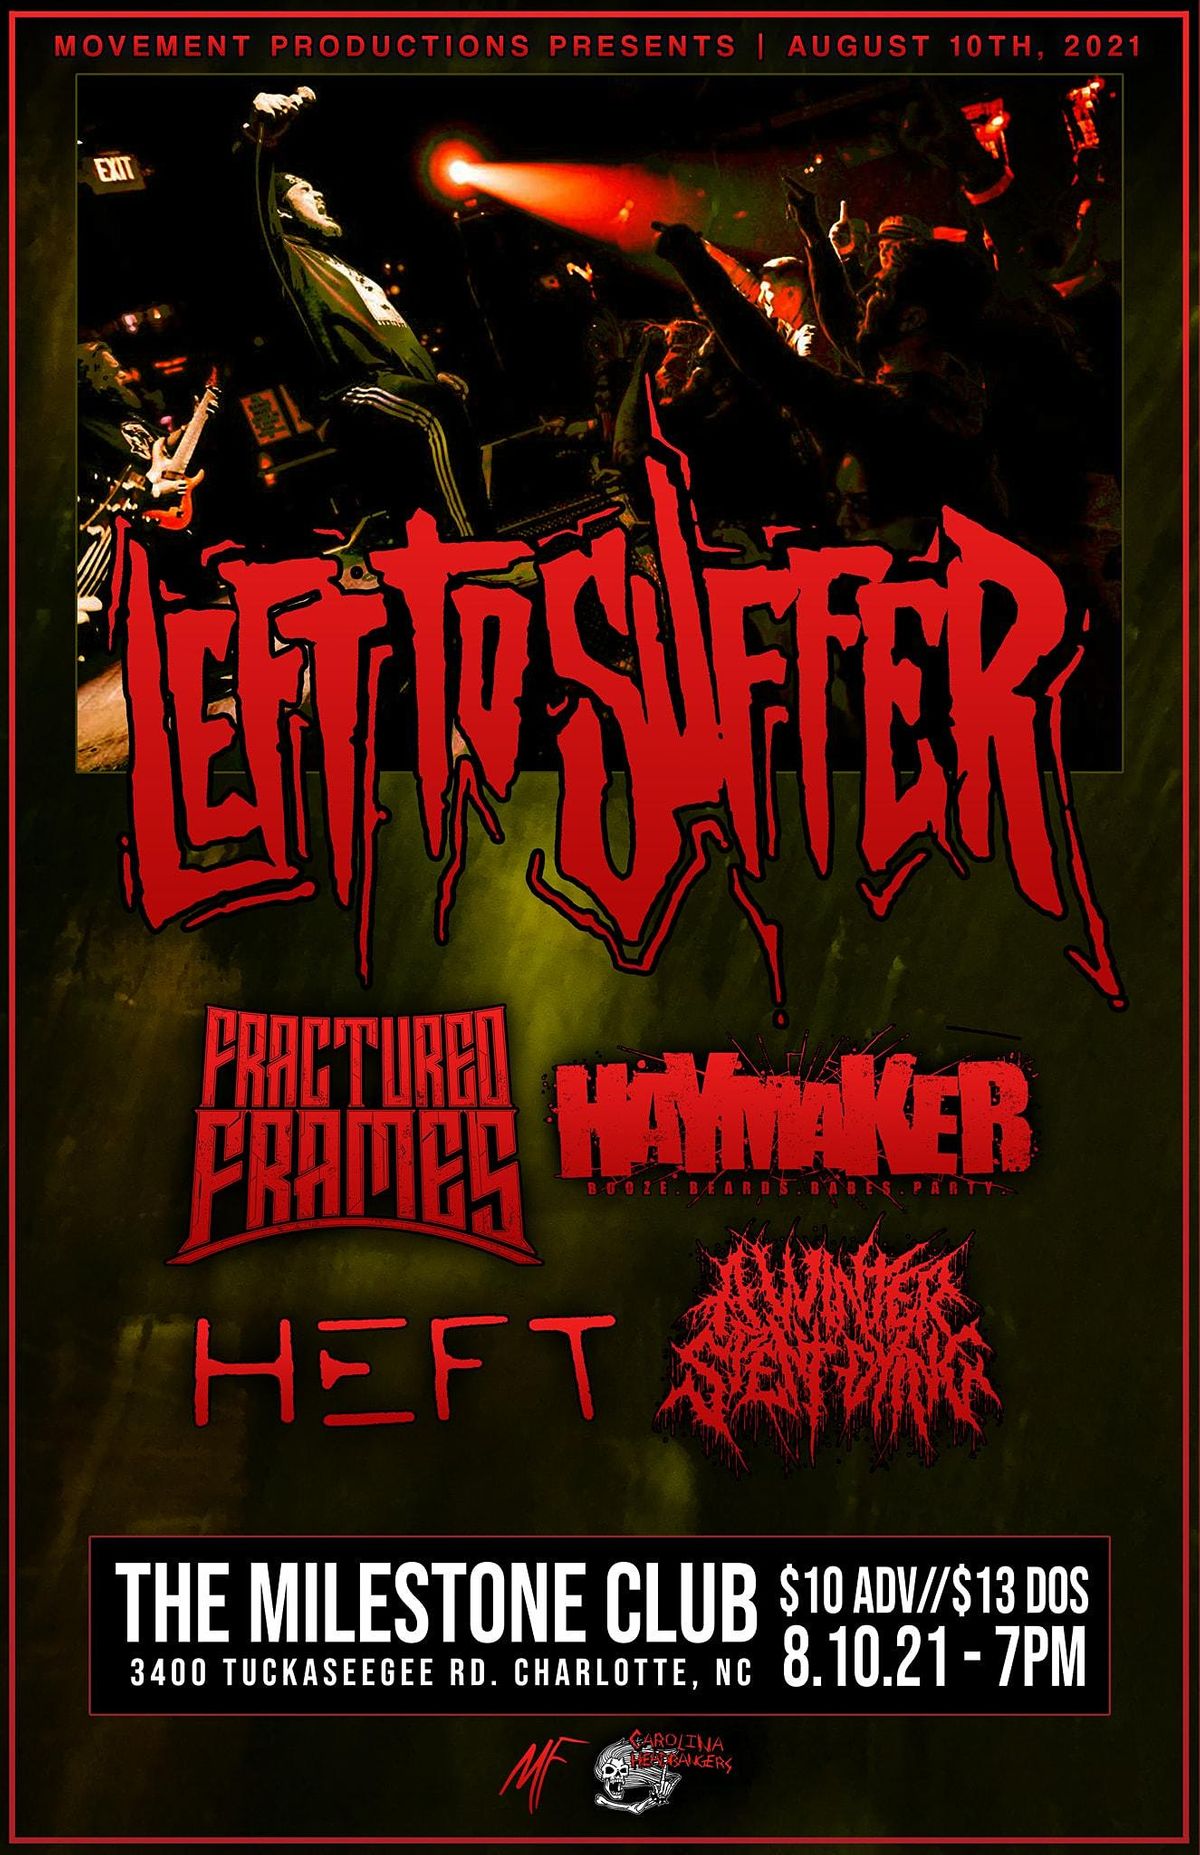 LEFT TO SUFFER w\/ FRACTURED FRAMES, HAYMAKER, HEFT & A WINTER SPENT DYING